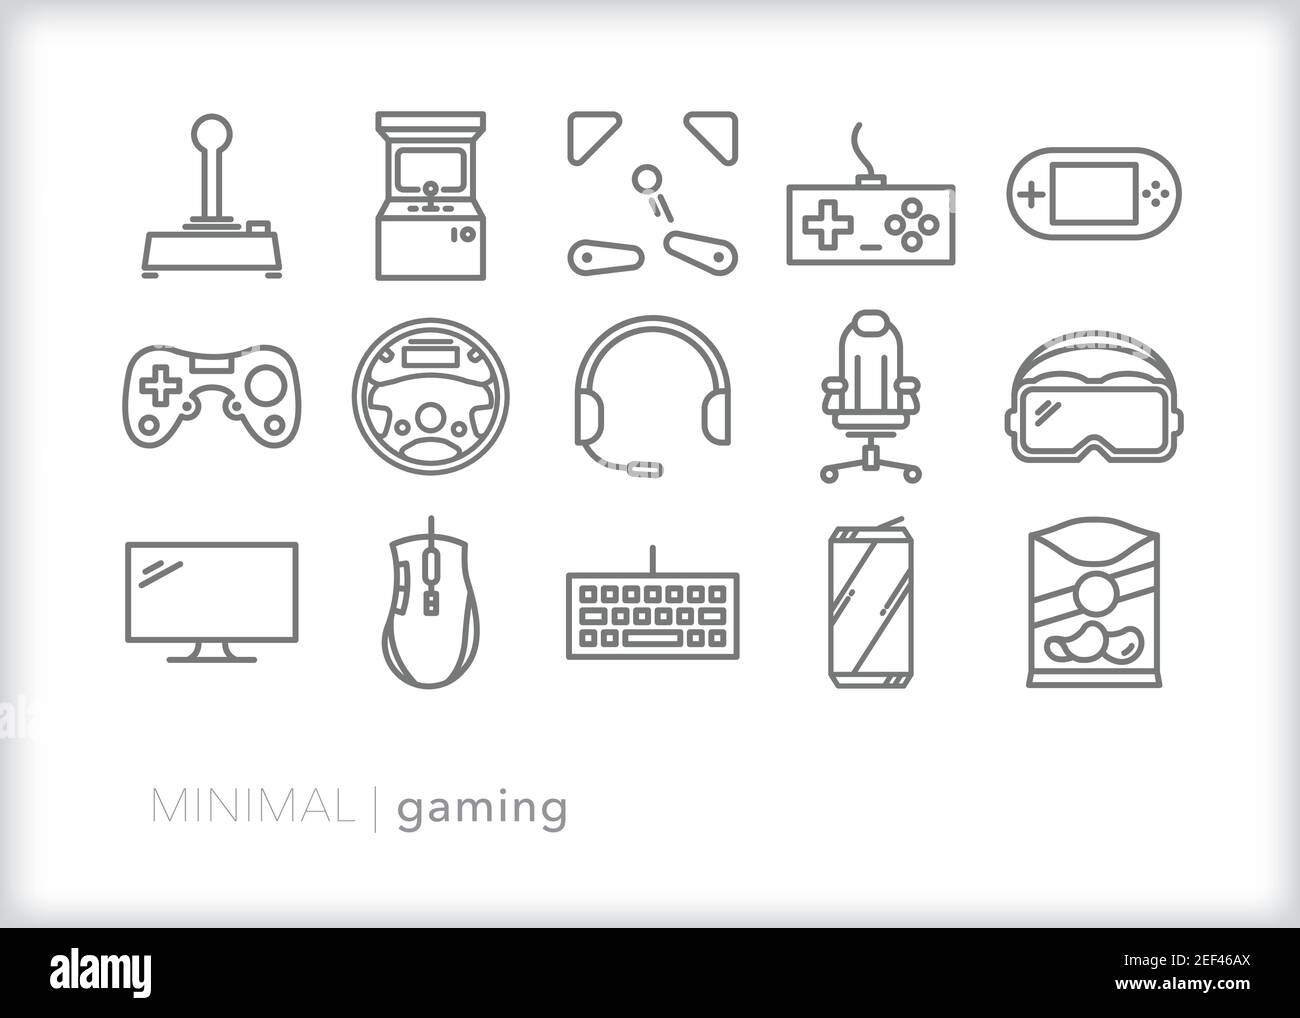 Set of gaming line icons for playing video games in an arcade or streaming online Stock Vector